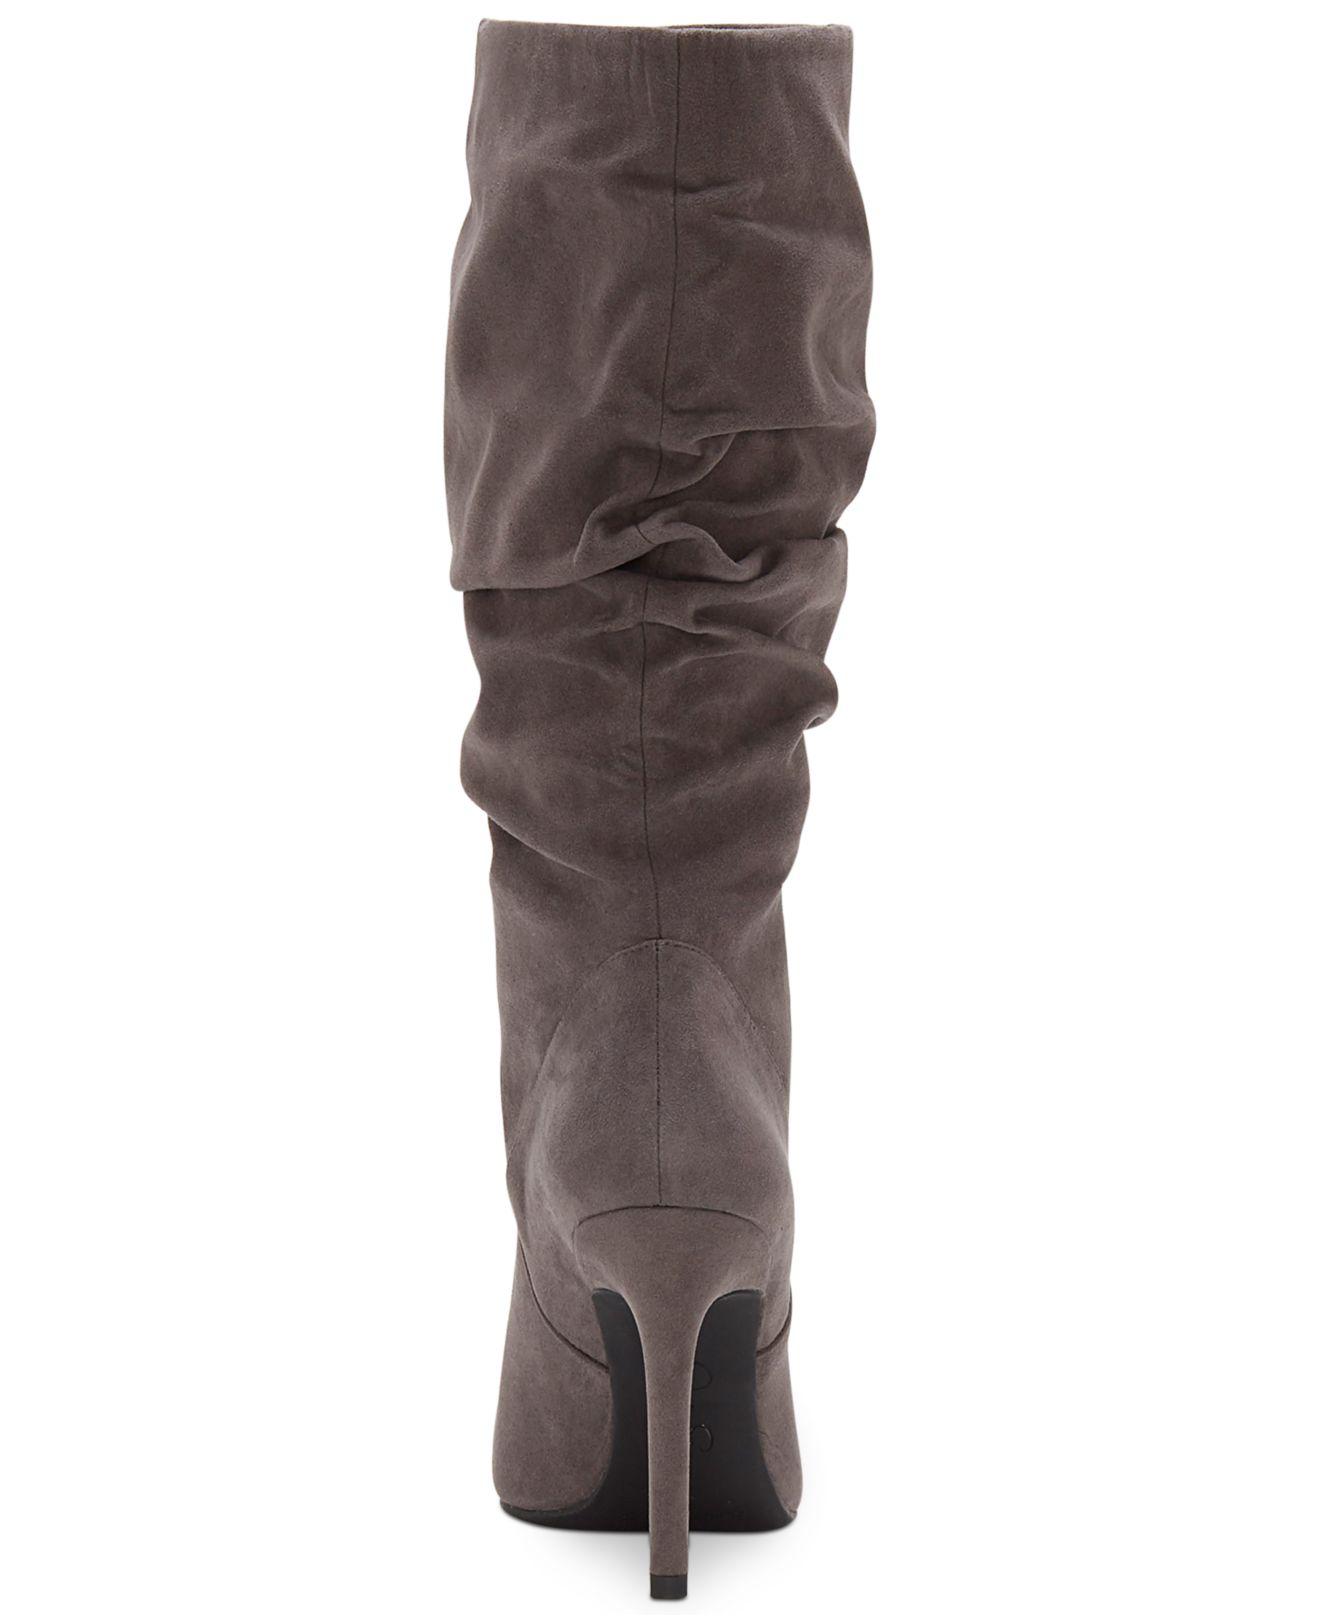 jessica simpson slouchy boots